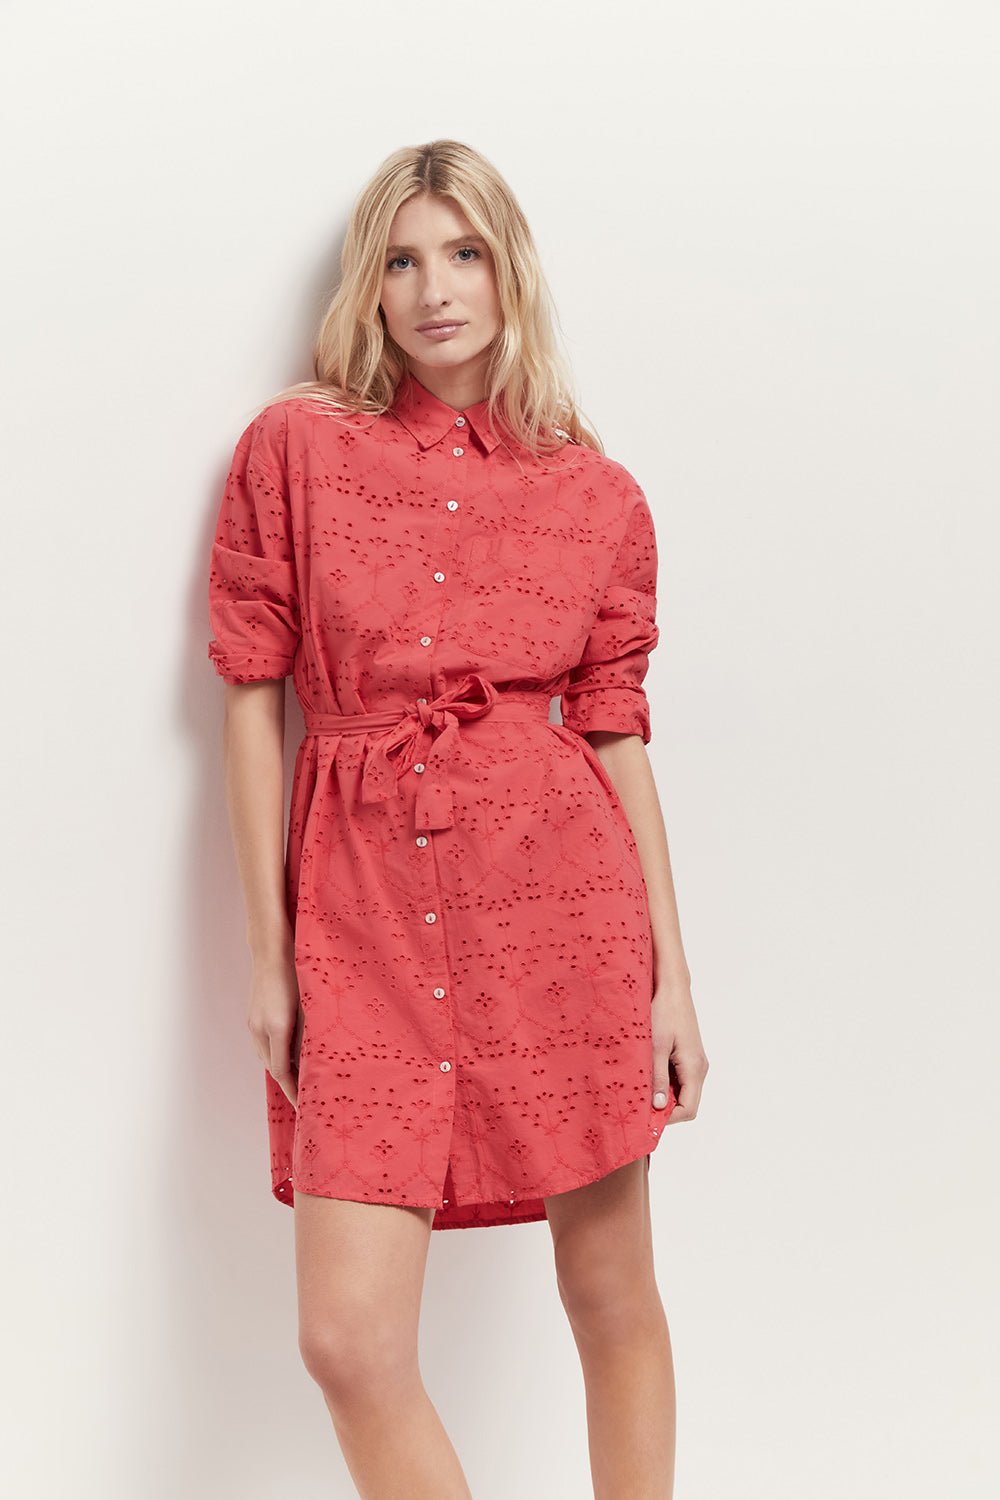 ROMEA - Robe chemise hibiscus en broderie anglaise